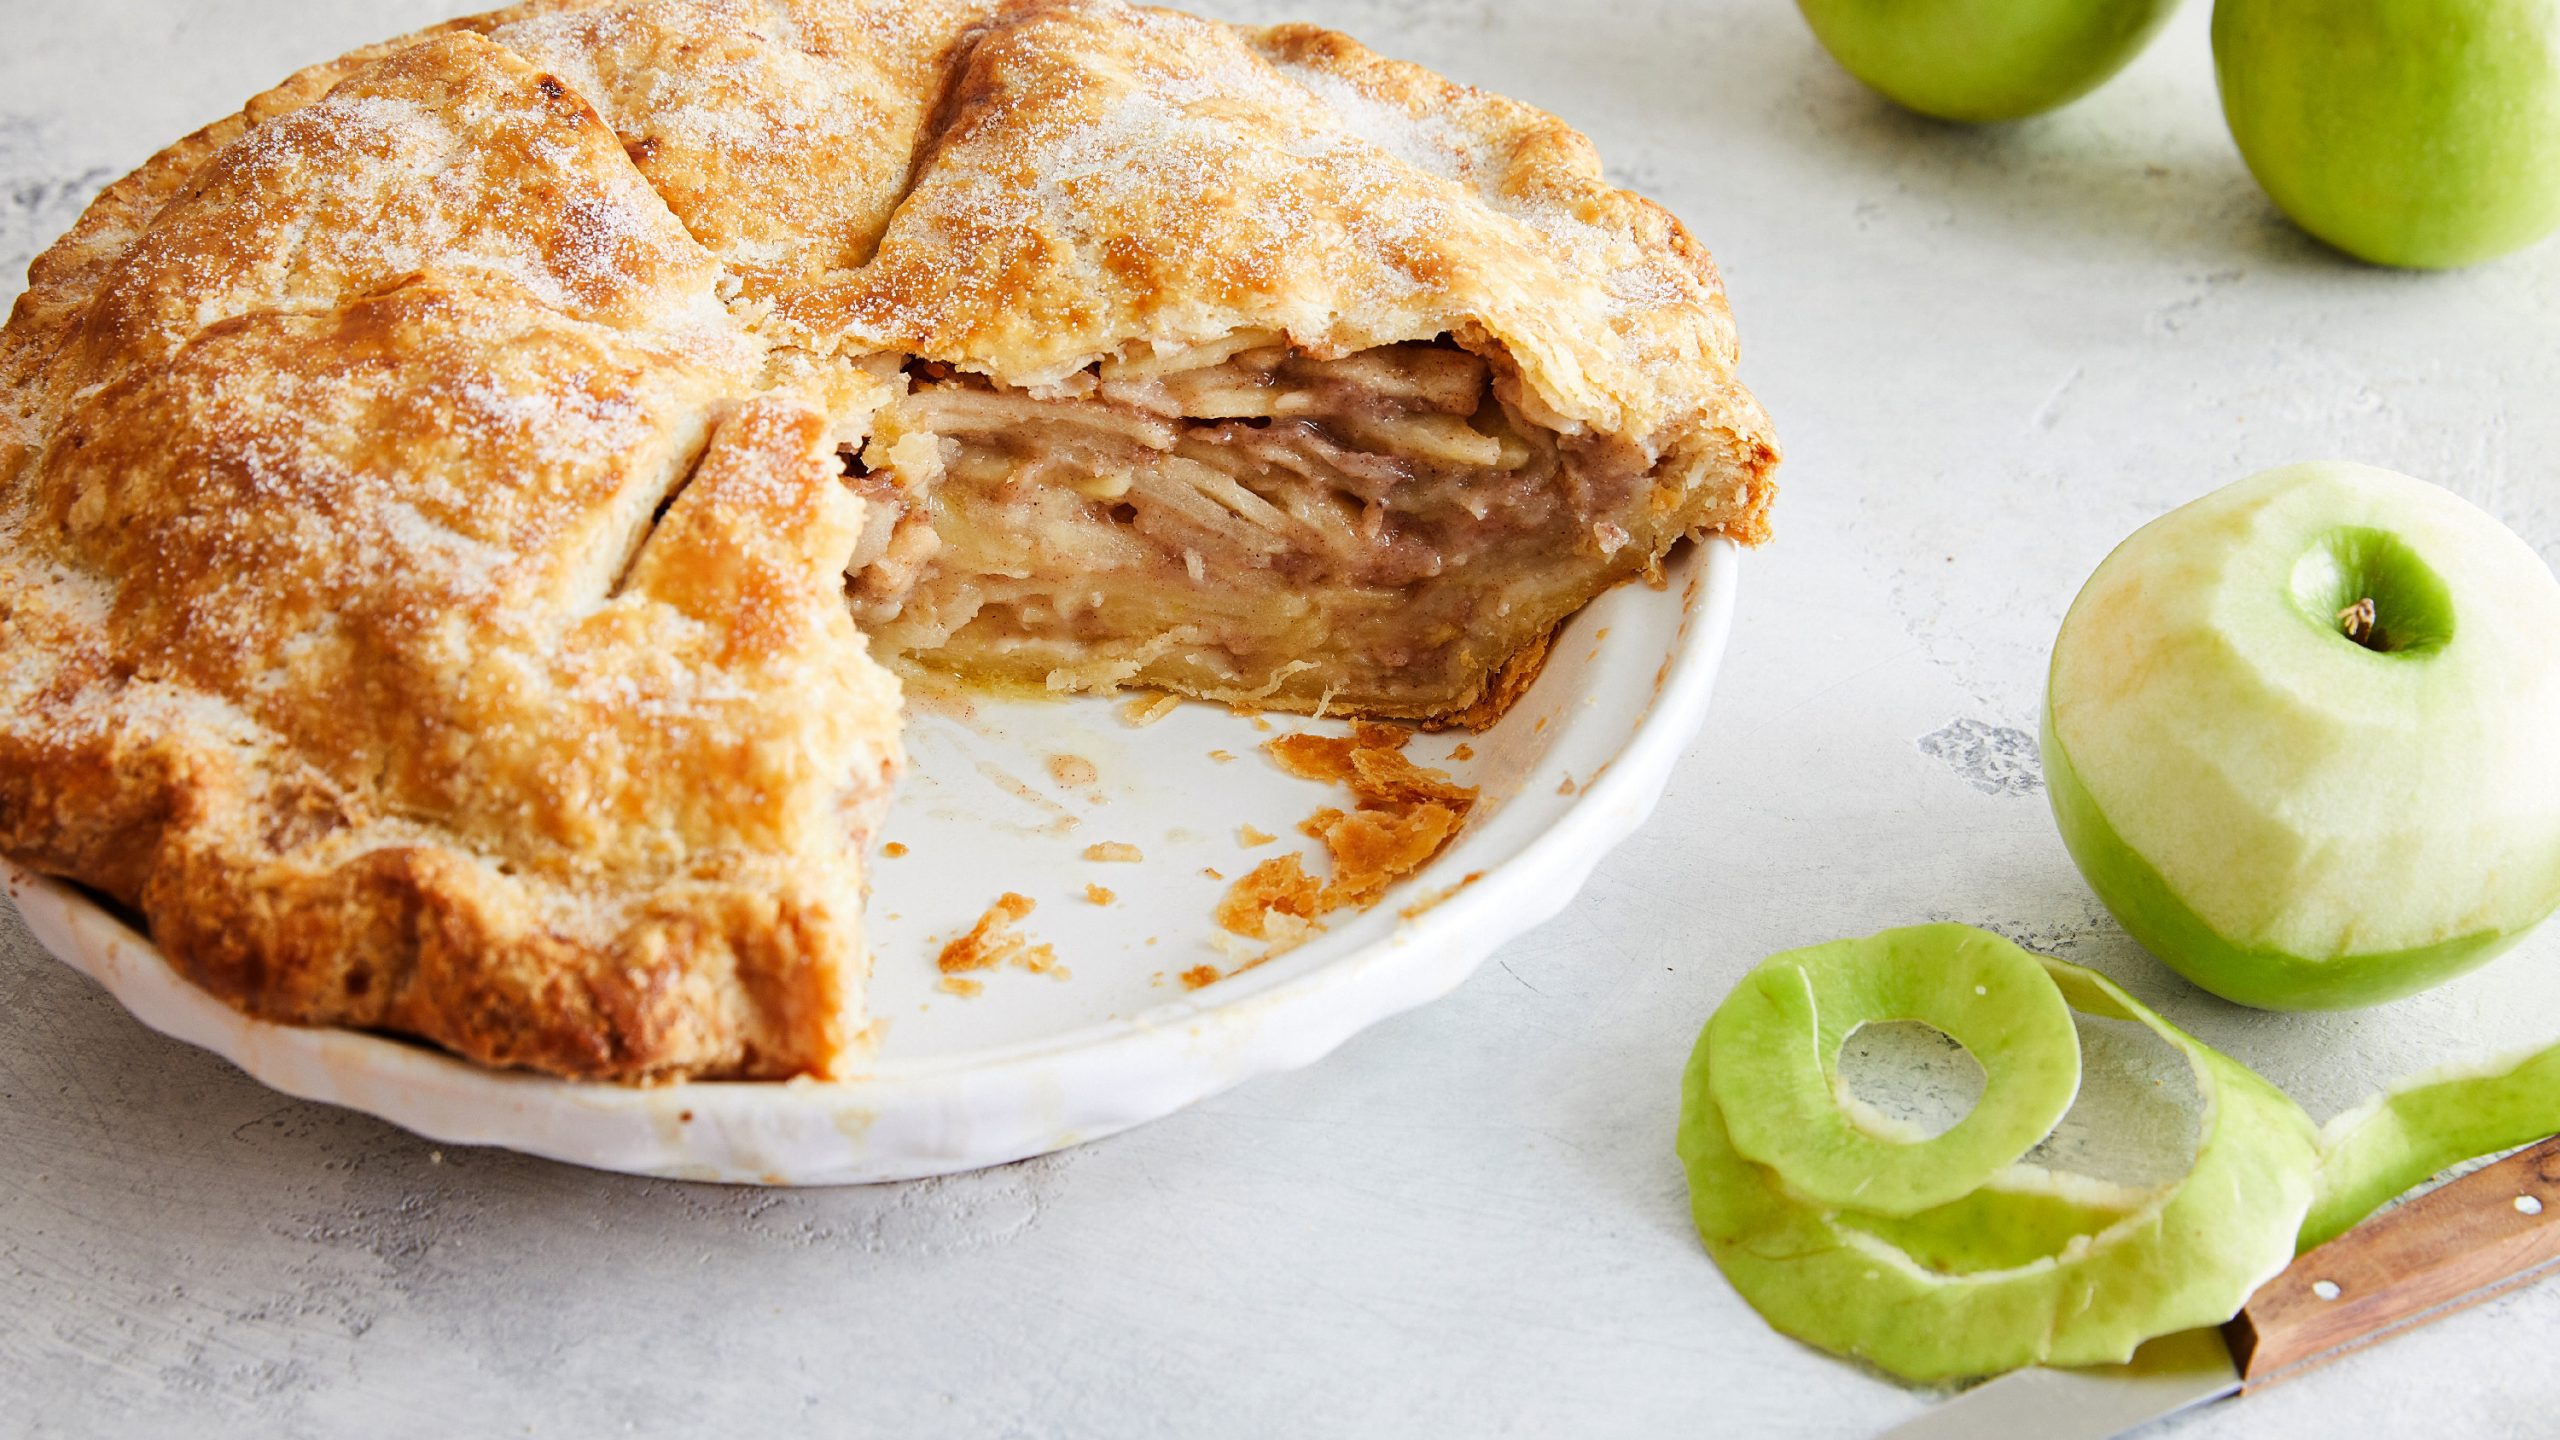 An Apple Pie That Lasts for Days